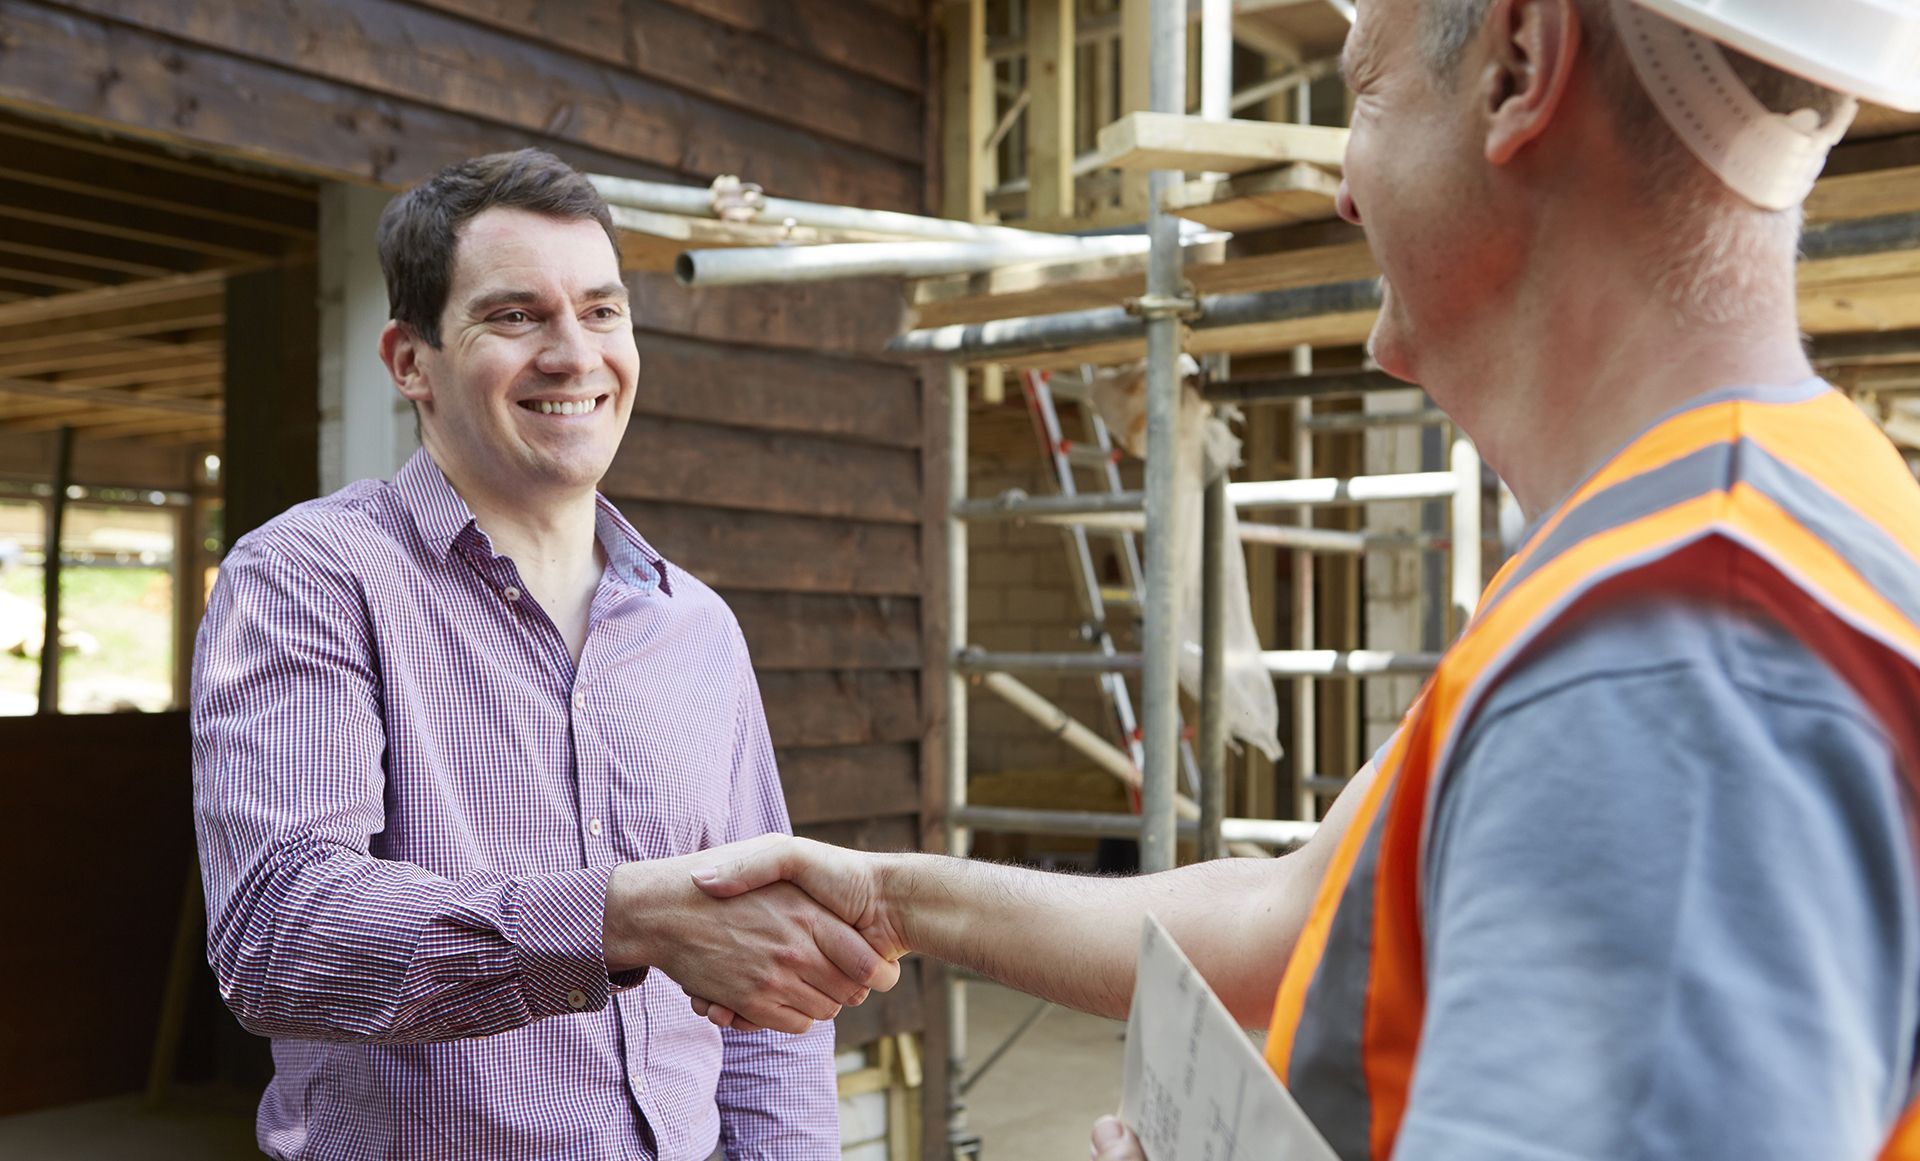 A man is shaking hands with a construction worker at a construction site.